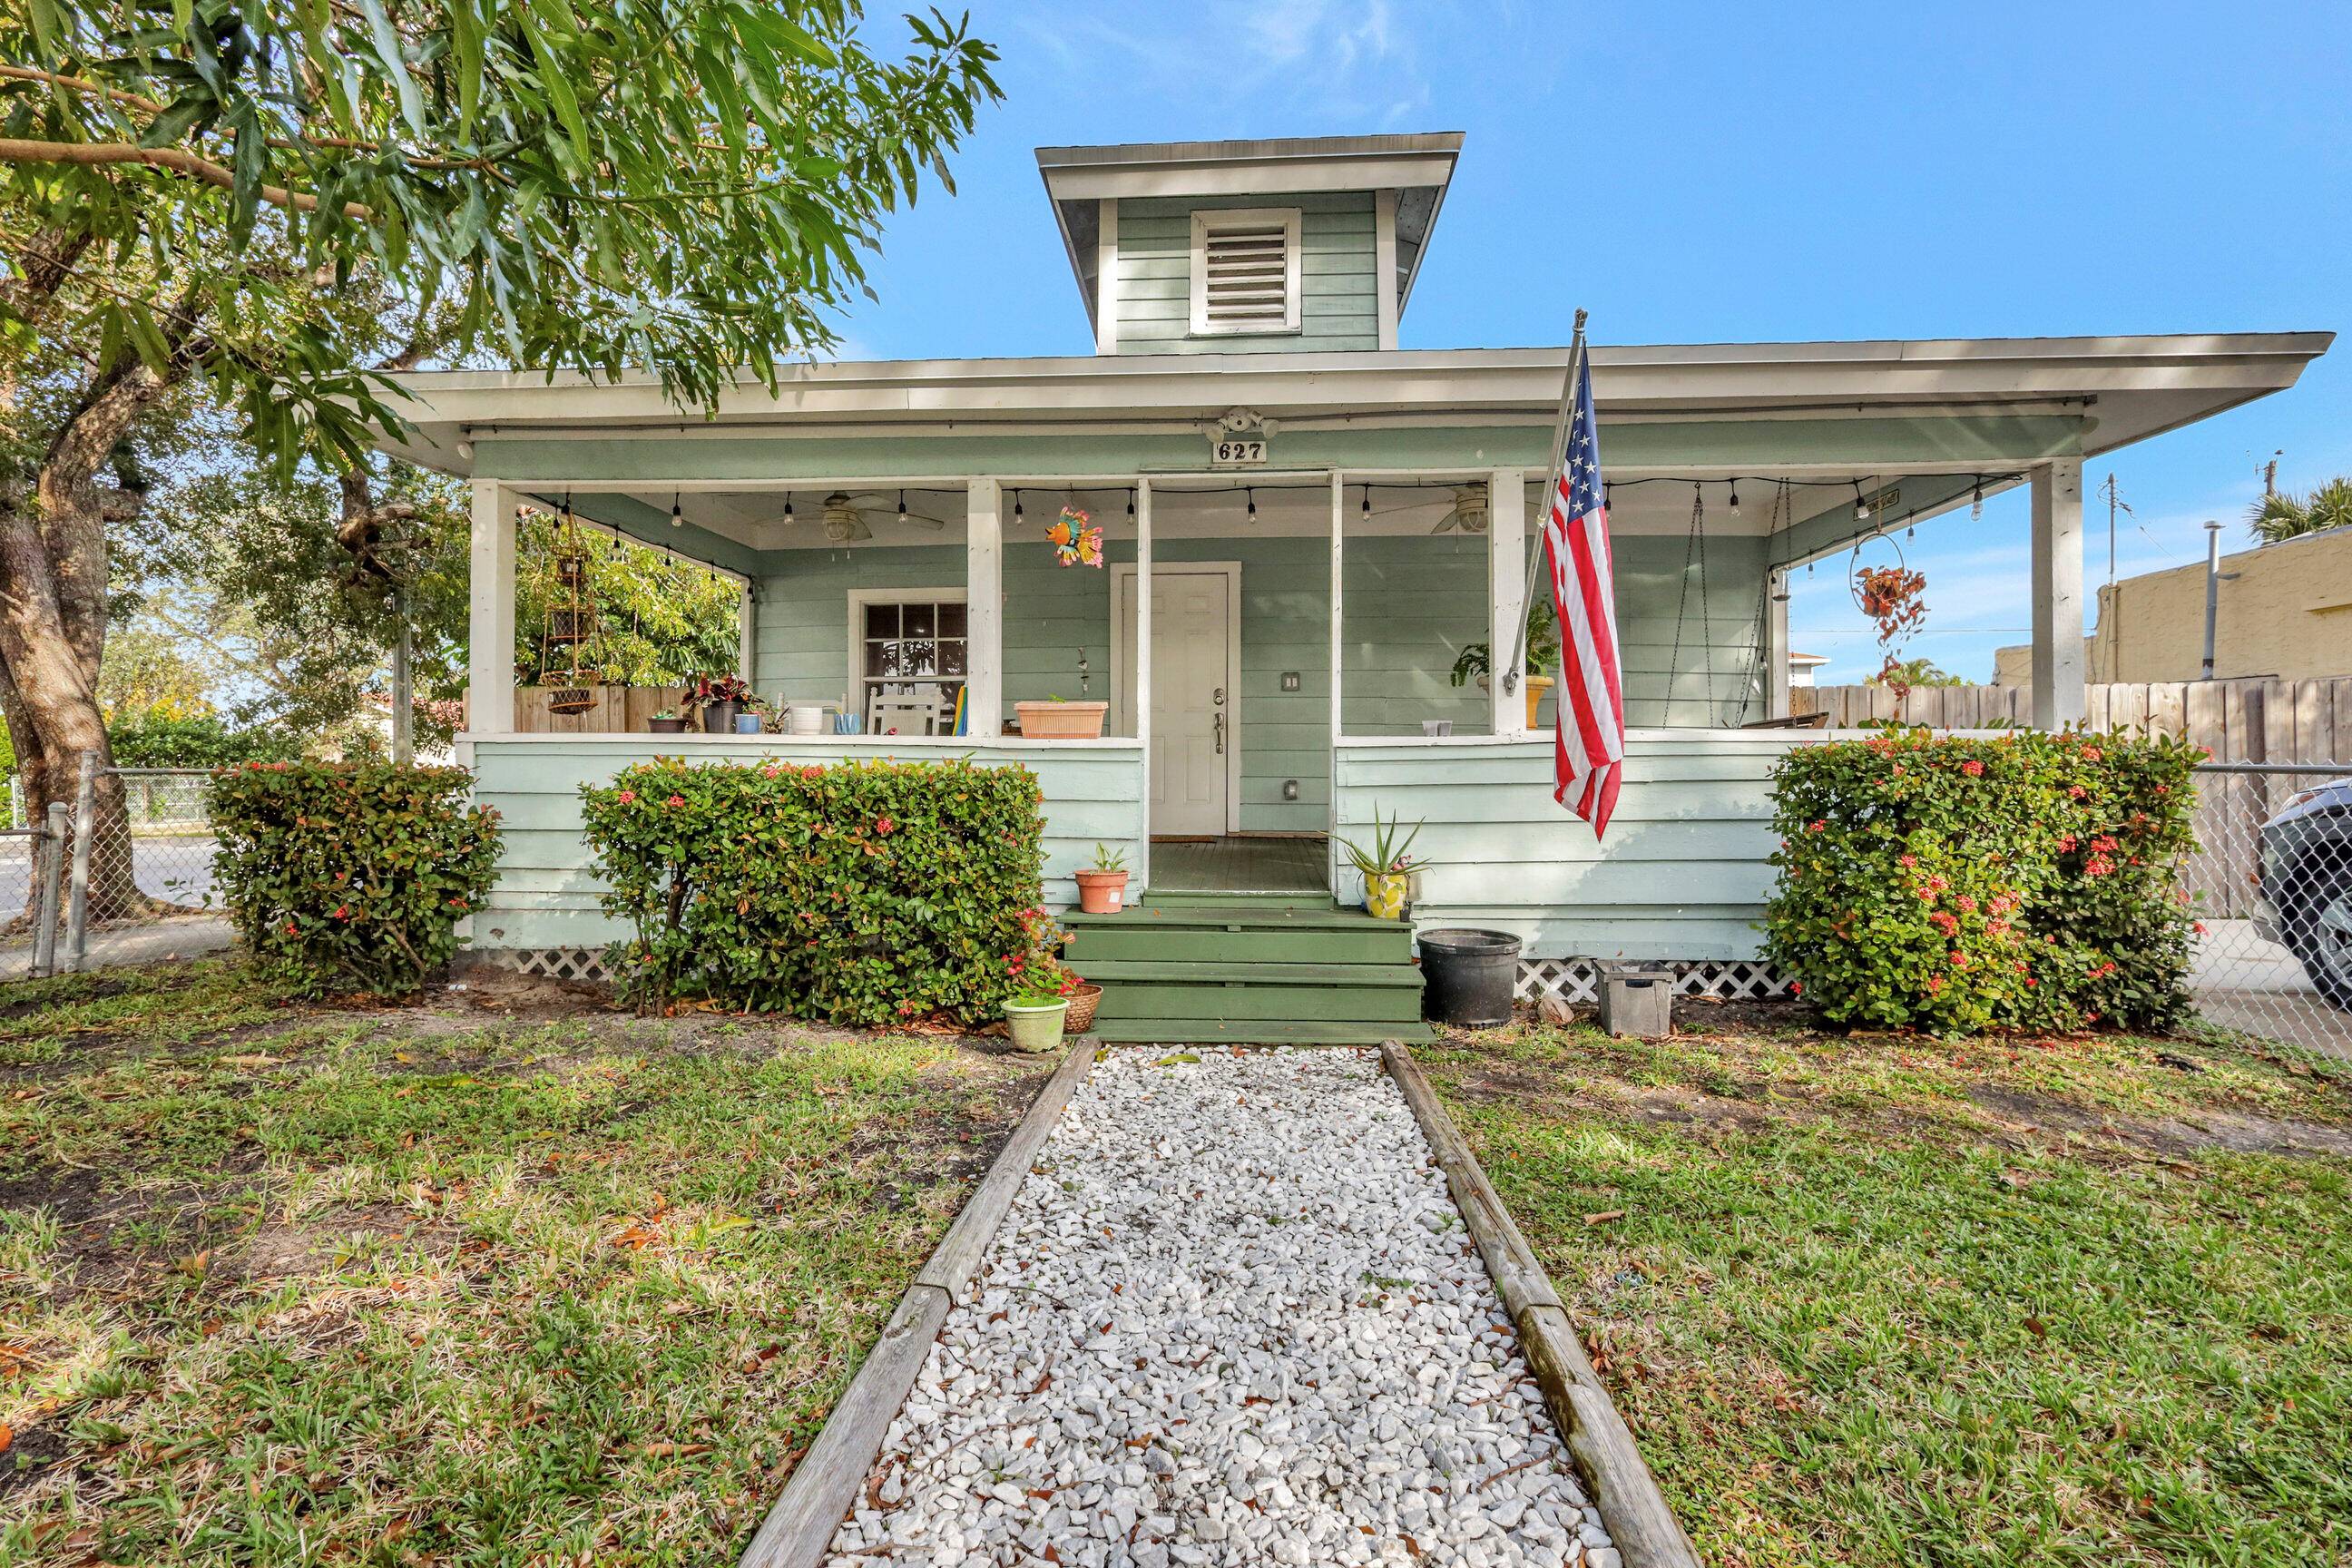 Income generating Key West Style home conveniently nestled between Flamingo park, El Cid, Prospect Park, and north of SoSo.